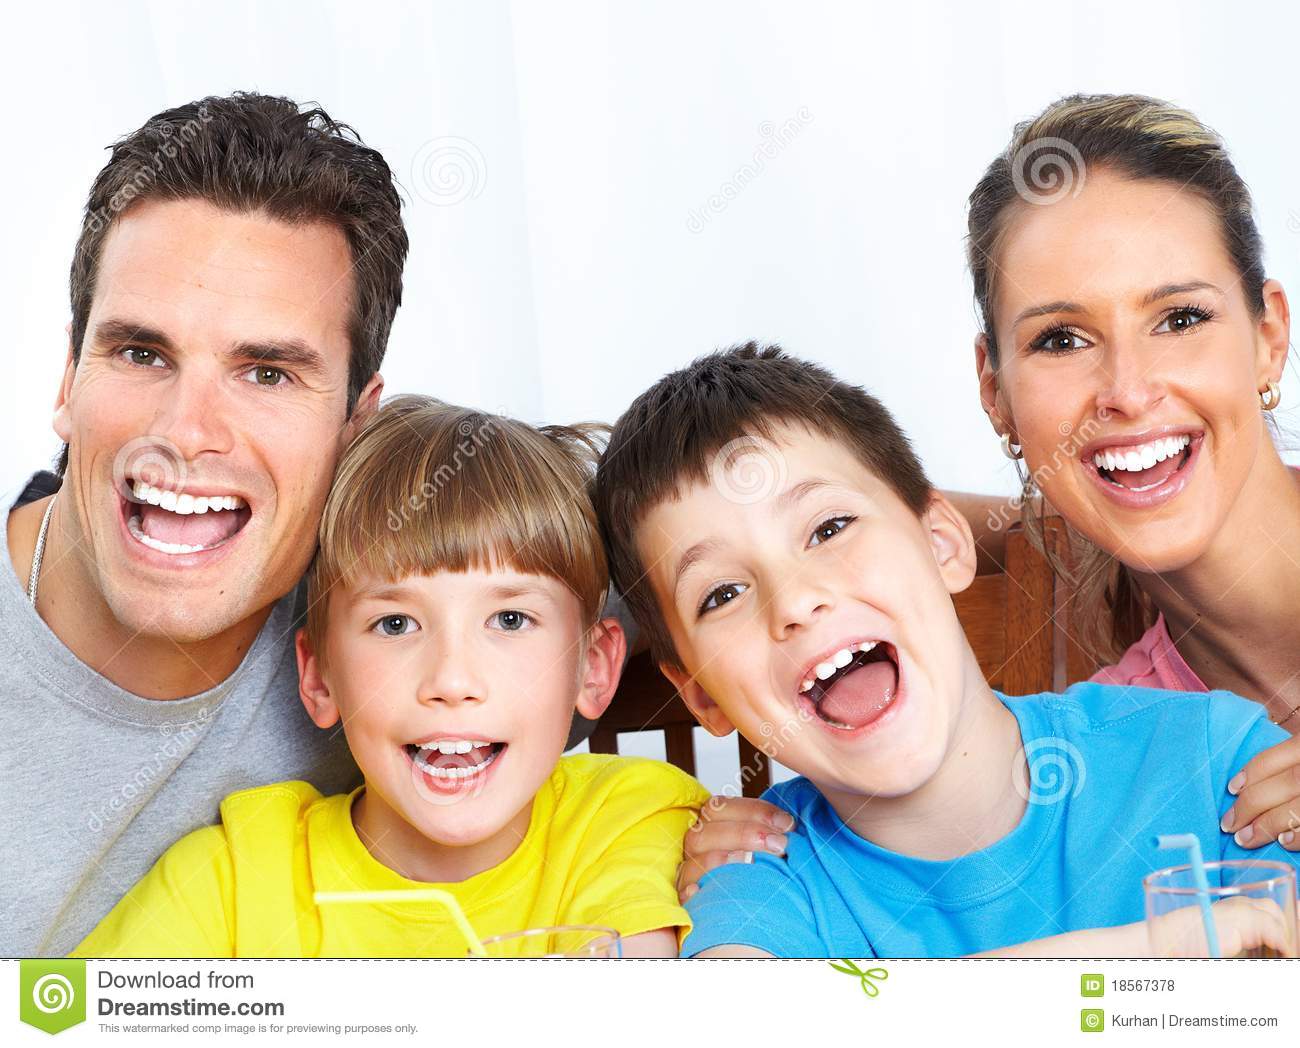 Royalty Free Images of Happy Families